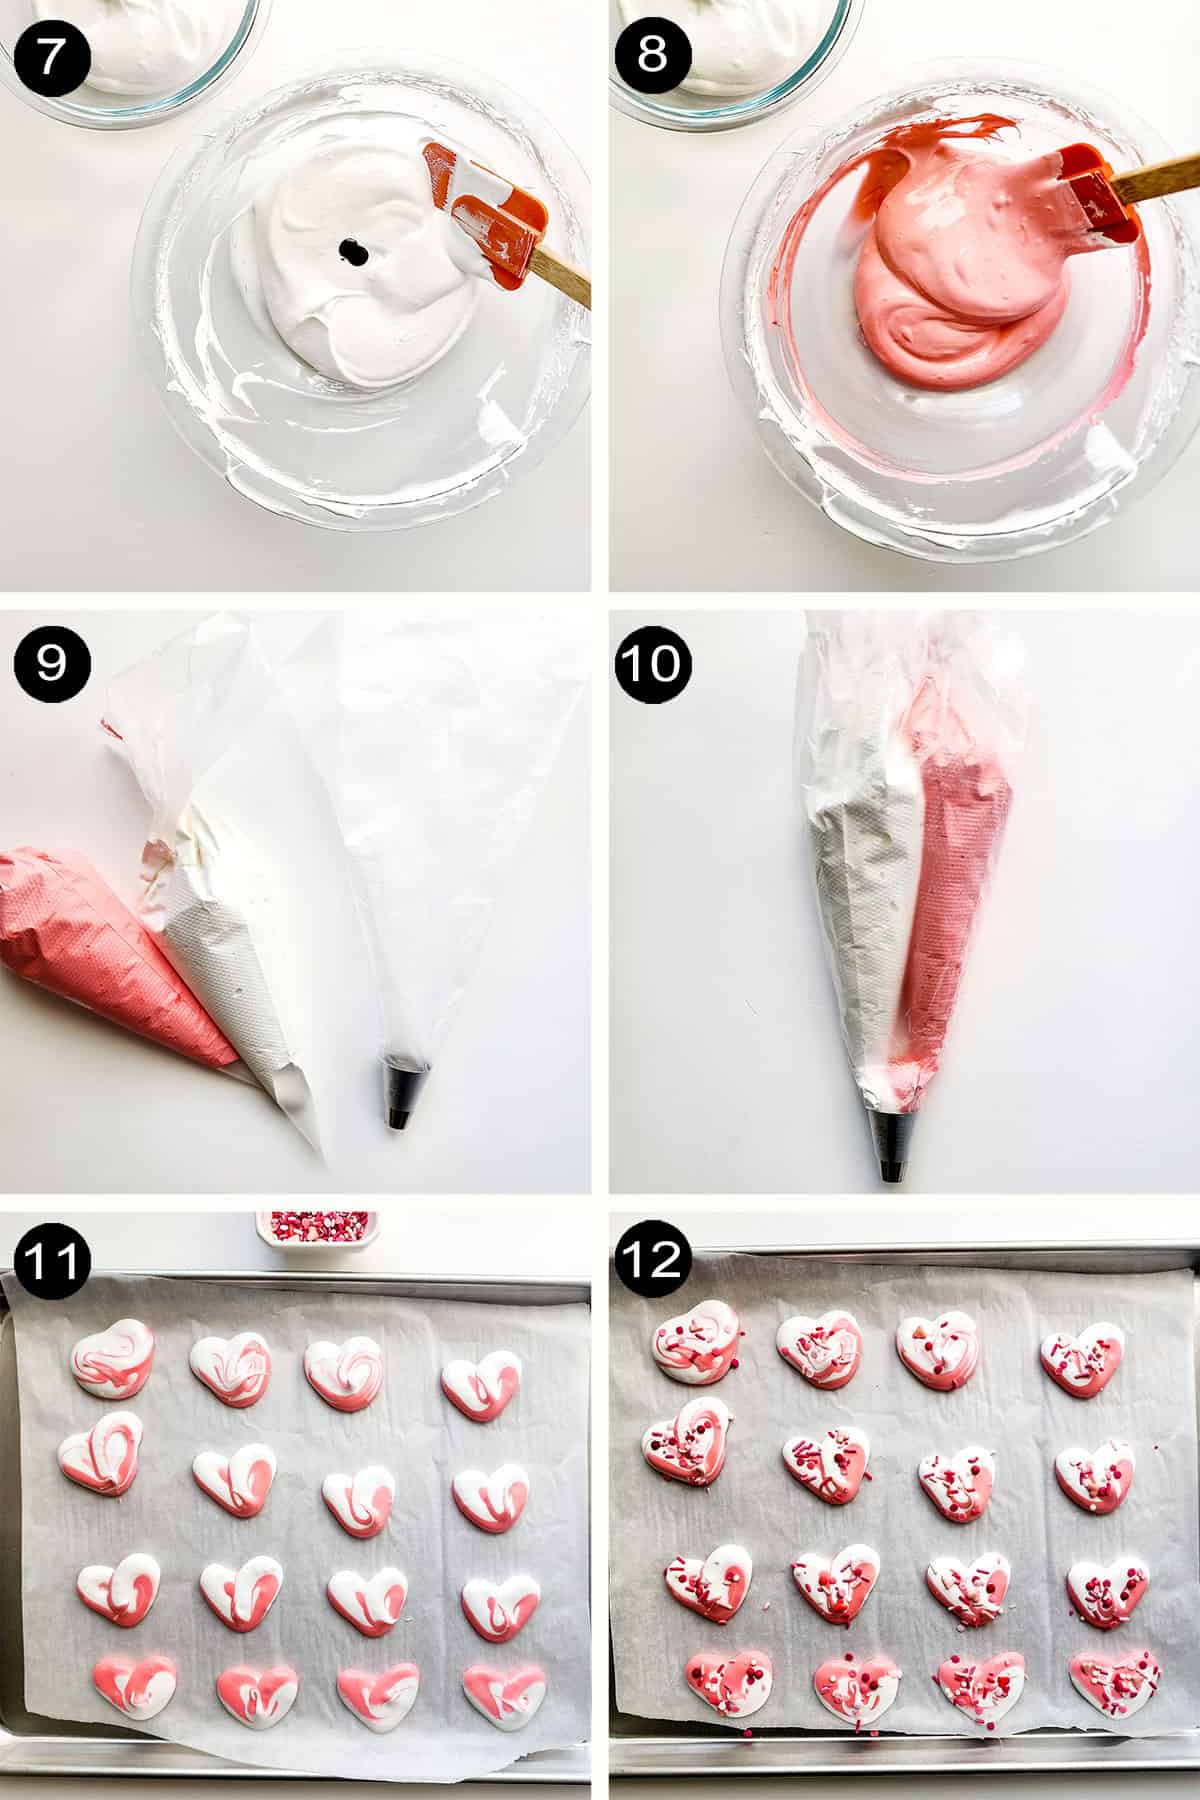 Finishing steps to form and bake meringue cookies.